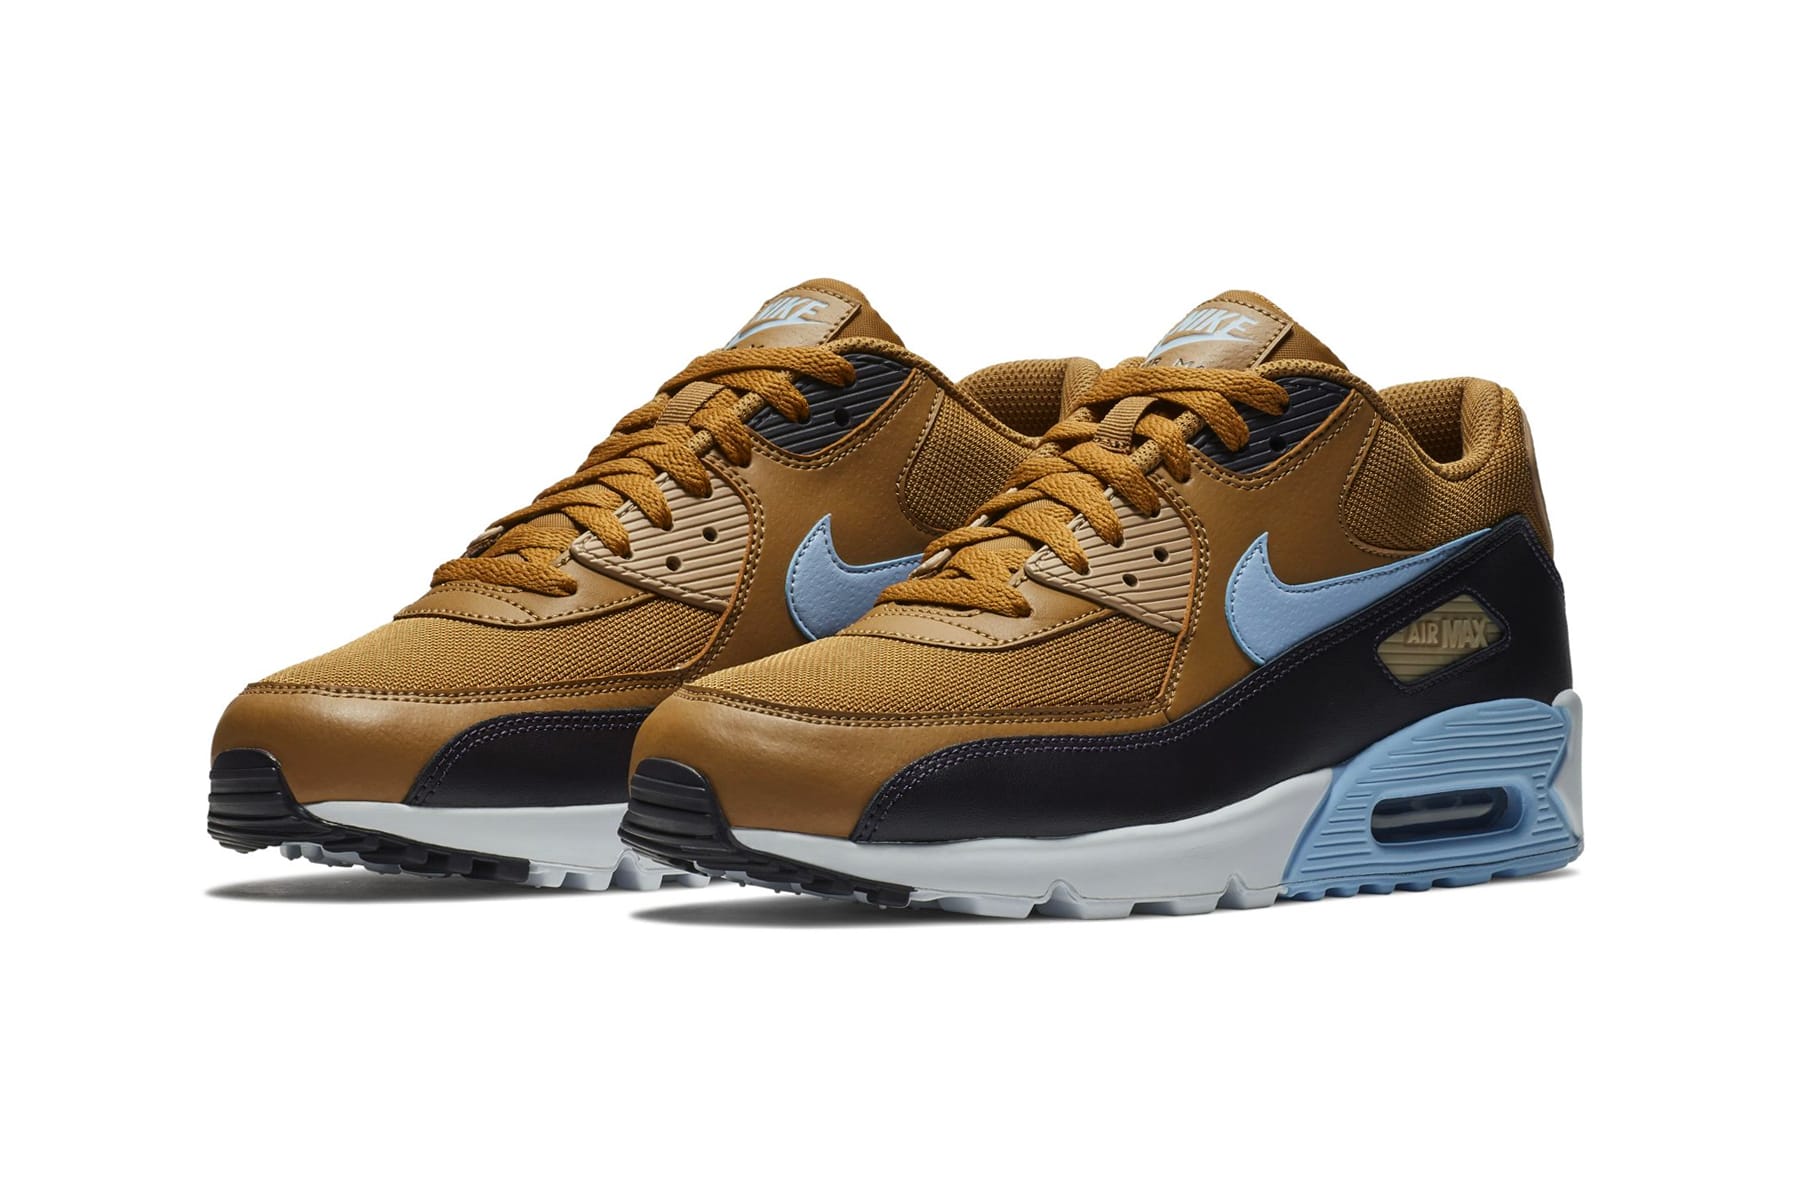 air max 90 limited edition 2018